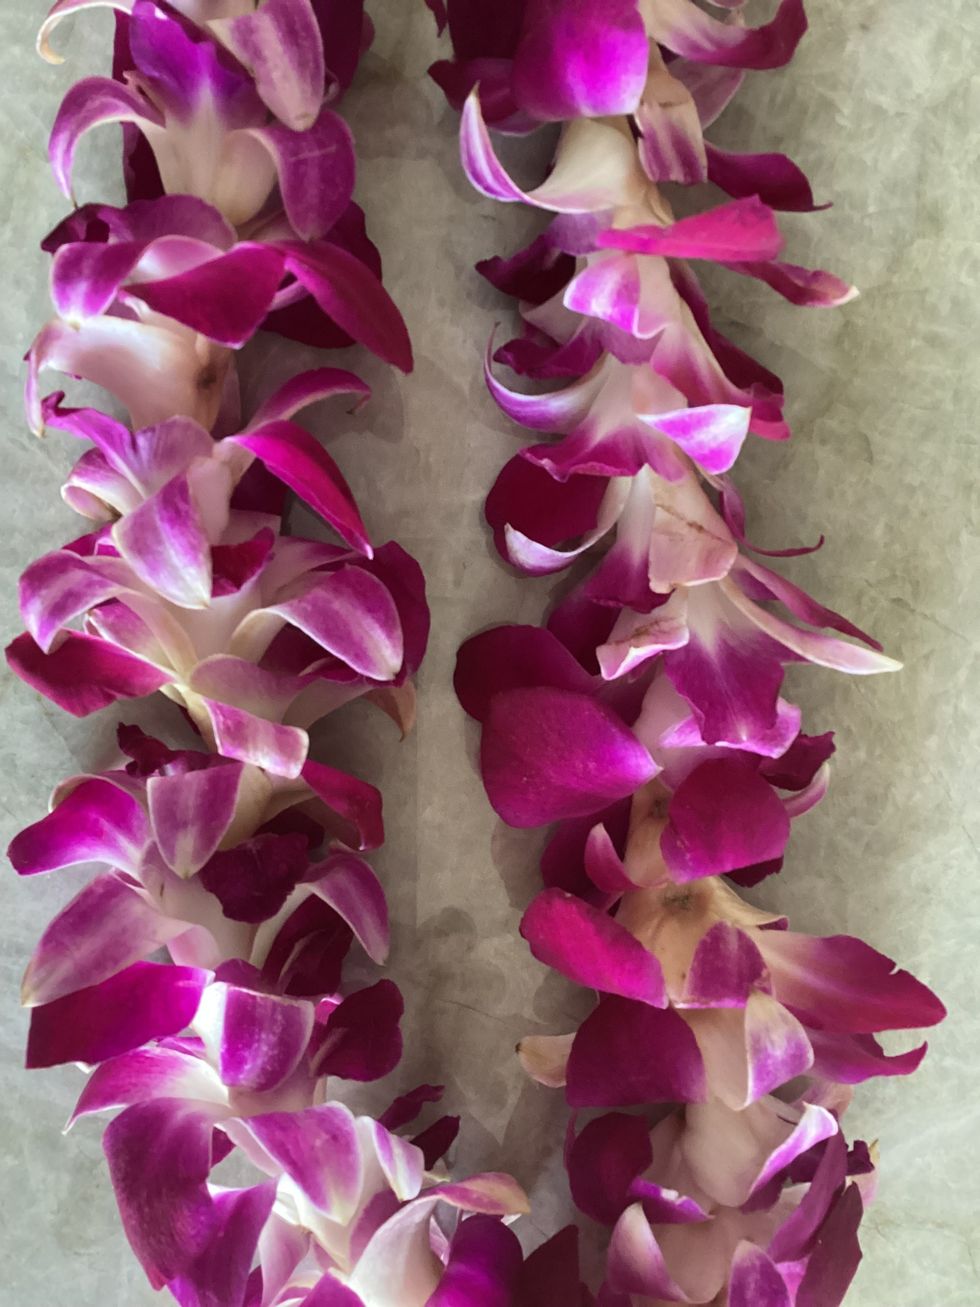 lei made of pink orchids